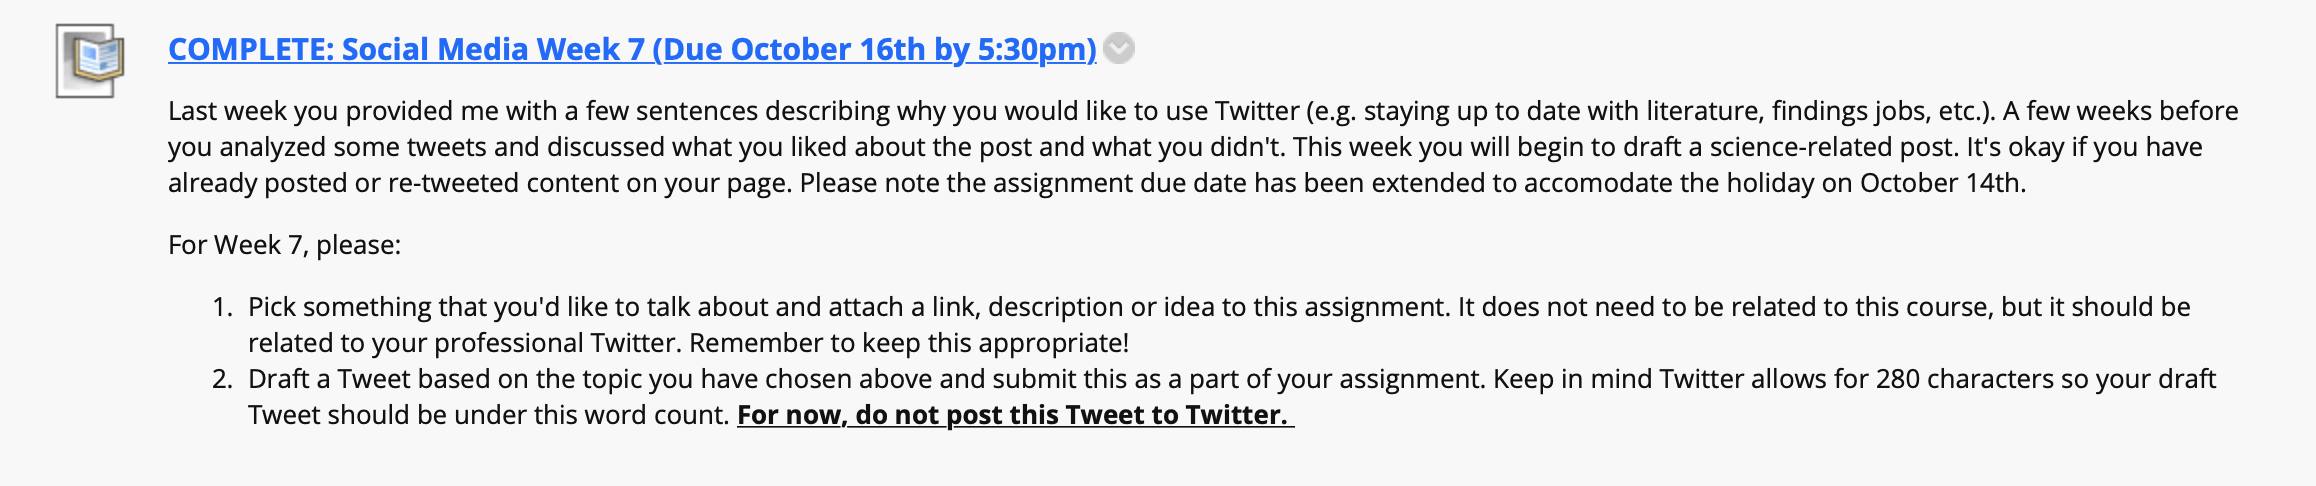 An extended screenshot from a course website that reads: Last week you provided me with a few sentences describing why you would like to use Twitter (e.g. staying up to date with literature, findings jobs, etc.). A few weeks before you analyzed some tweets and discussed what you liked about the post and what you didn't. This week you will begin to draft a science-related post. It's okay if you have already posted or re-tweeted content on your page. Please note the assignment due date has been extended to accommodate the holiday on October 14th. 
For Week 7, please: 
Pick something that you'd like to talk about and attach a link, description or idea to this assignment. It does not need to be related to this course, but it should be related to your professional Twitter. Remember to keep this appropriate!
Draft a Tweet based on the topic you have chosen above and submit this as a part of your assignment. Keep in mind Twitter allows for 280 characters so your draft Tweet should be under this word count. For now, do not post this Tweet to Twitter. 
